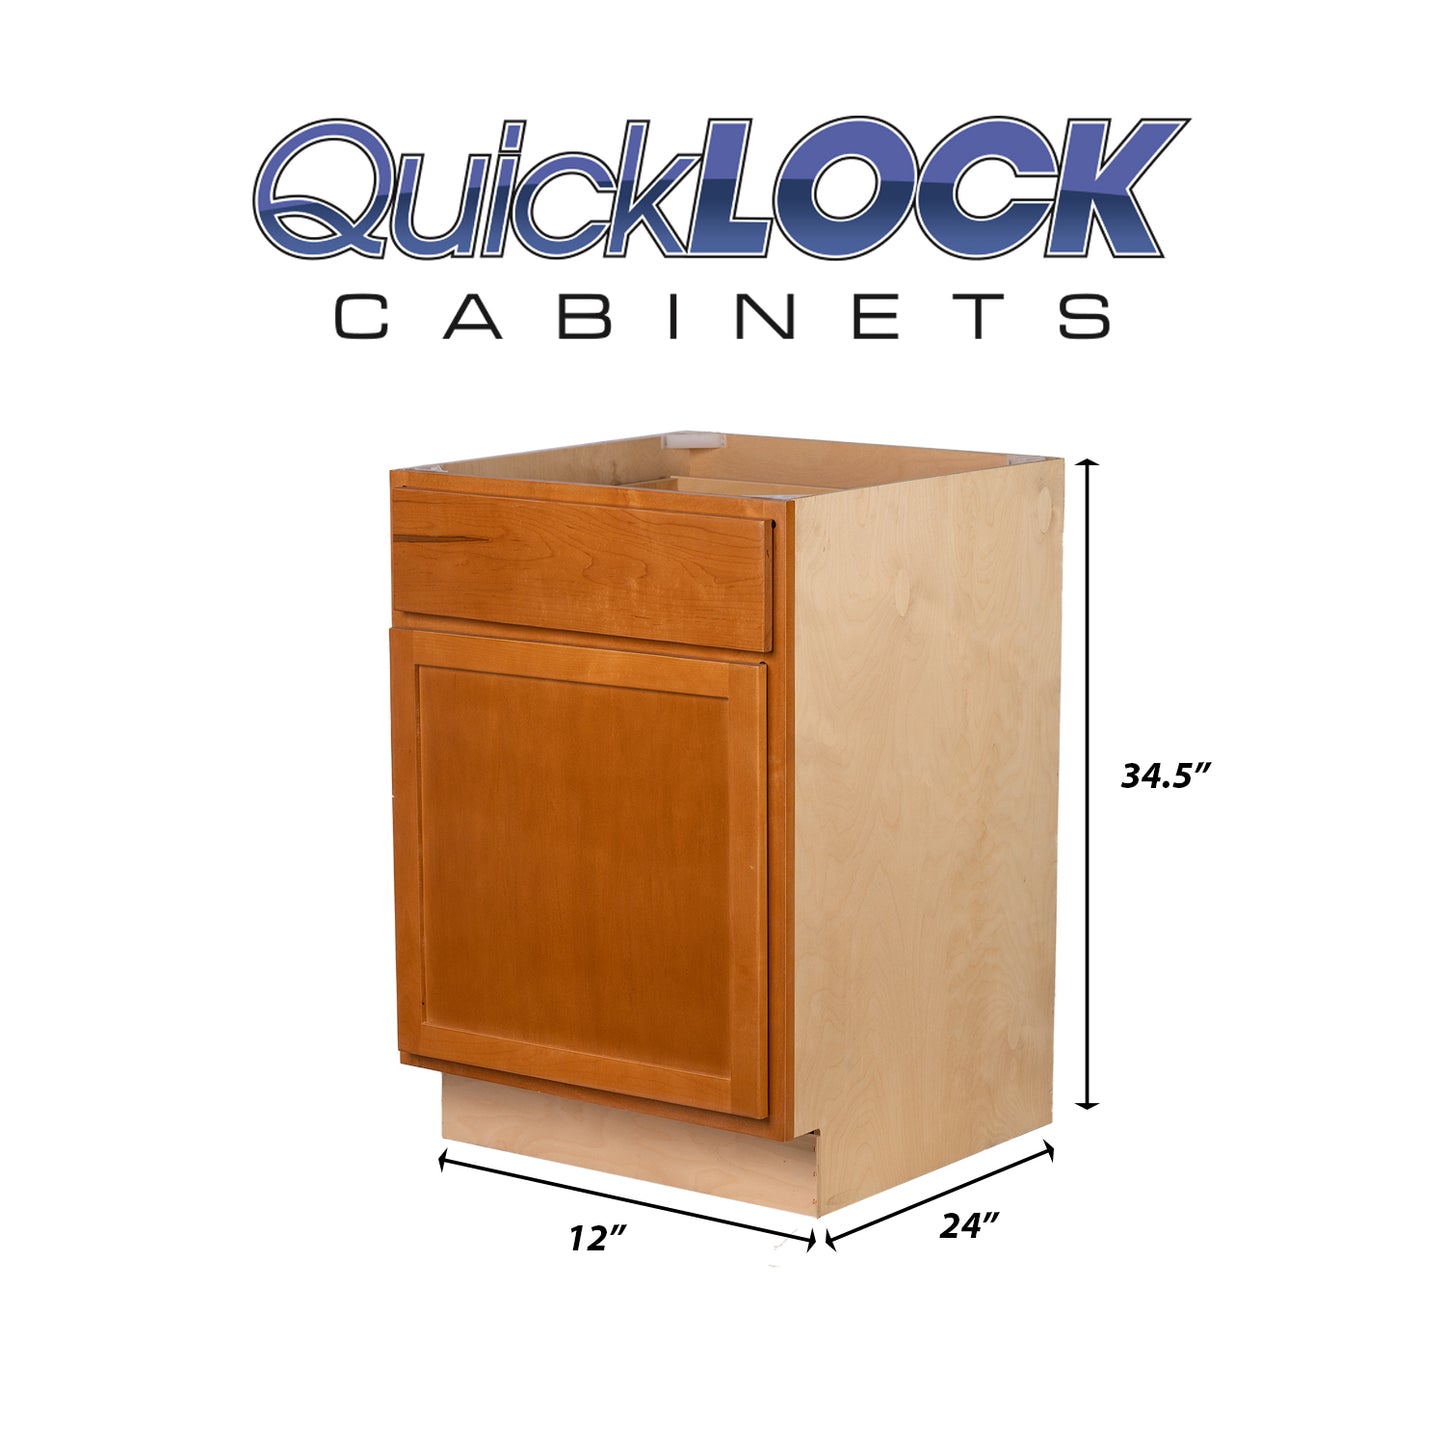 Quicklock RTA (Ready-to-Assemble) Provincial Stain Base Cabinet | 12"Wx34.5"Hx24"D